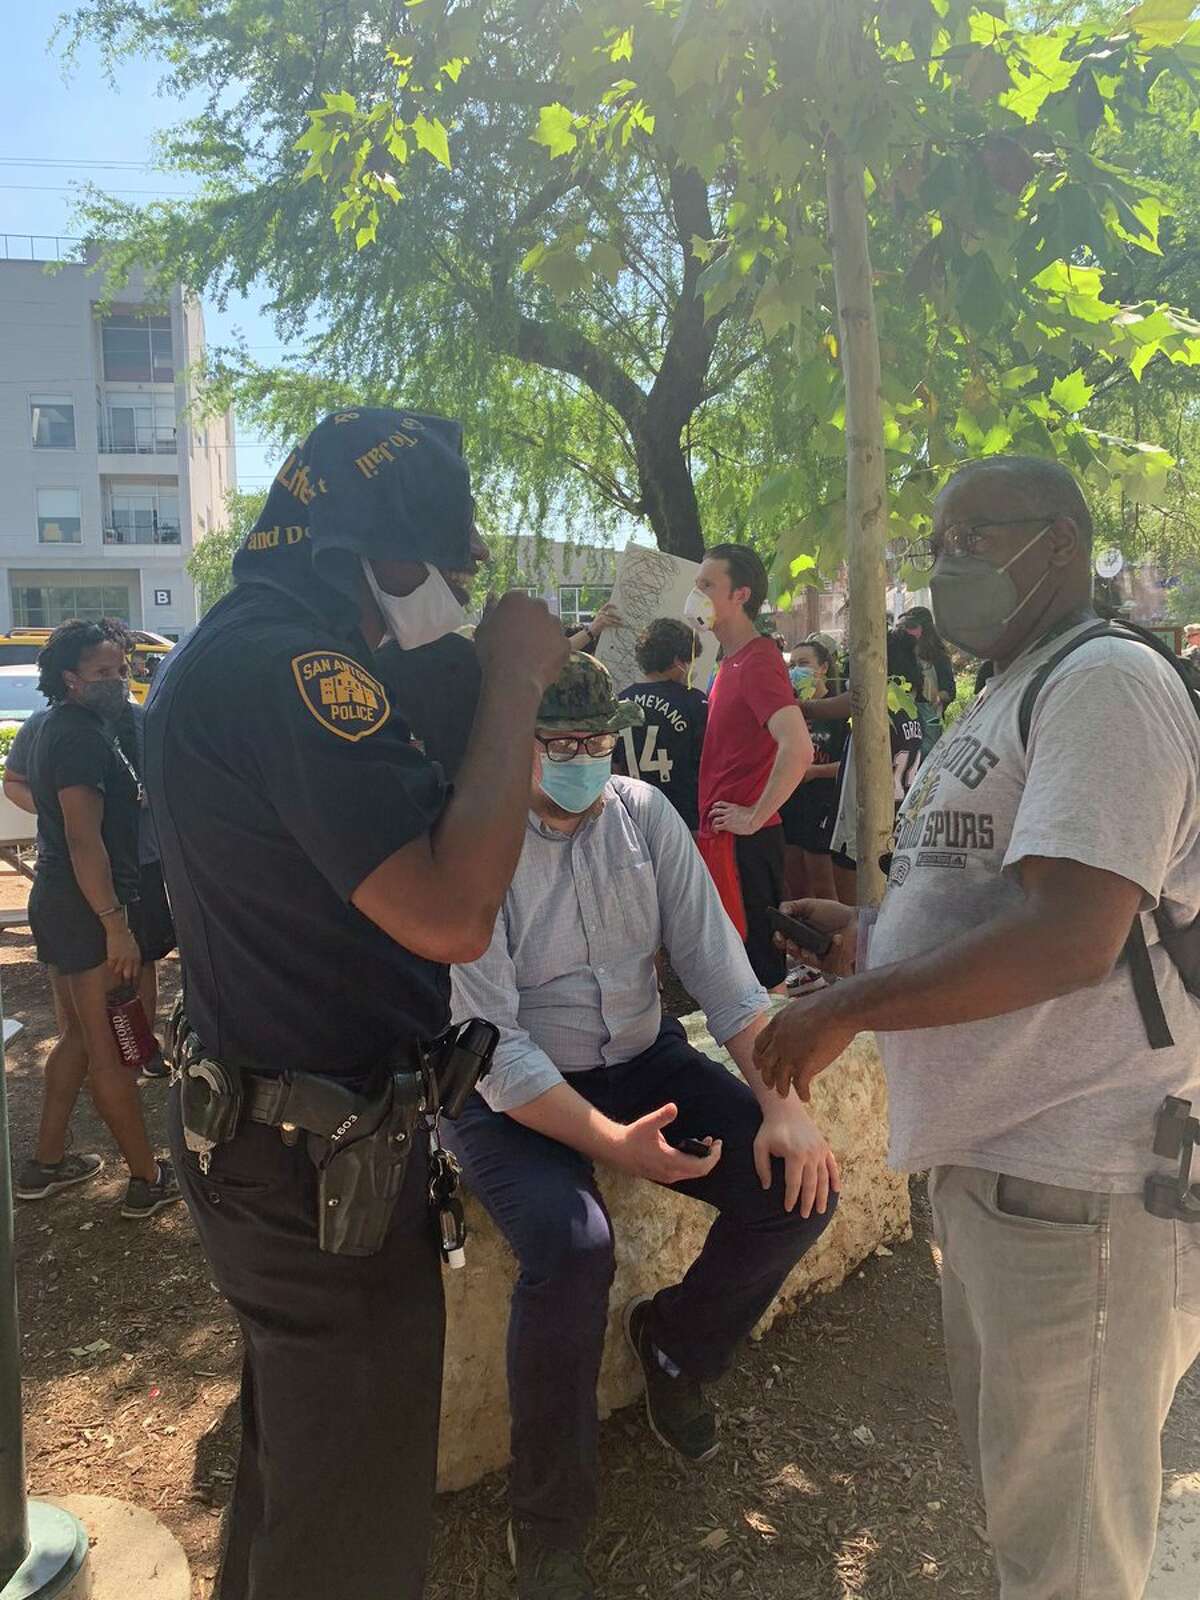 Officer Doug Greene, public information officer with the San Antonio Police Department, meets with protesters Monday, June 8, 2020, at Blue Star Arts Complex.